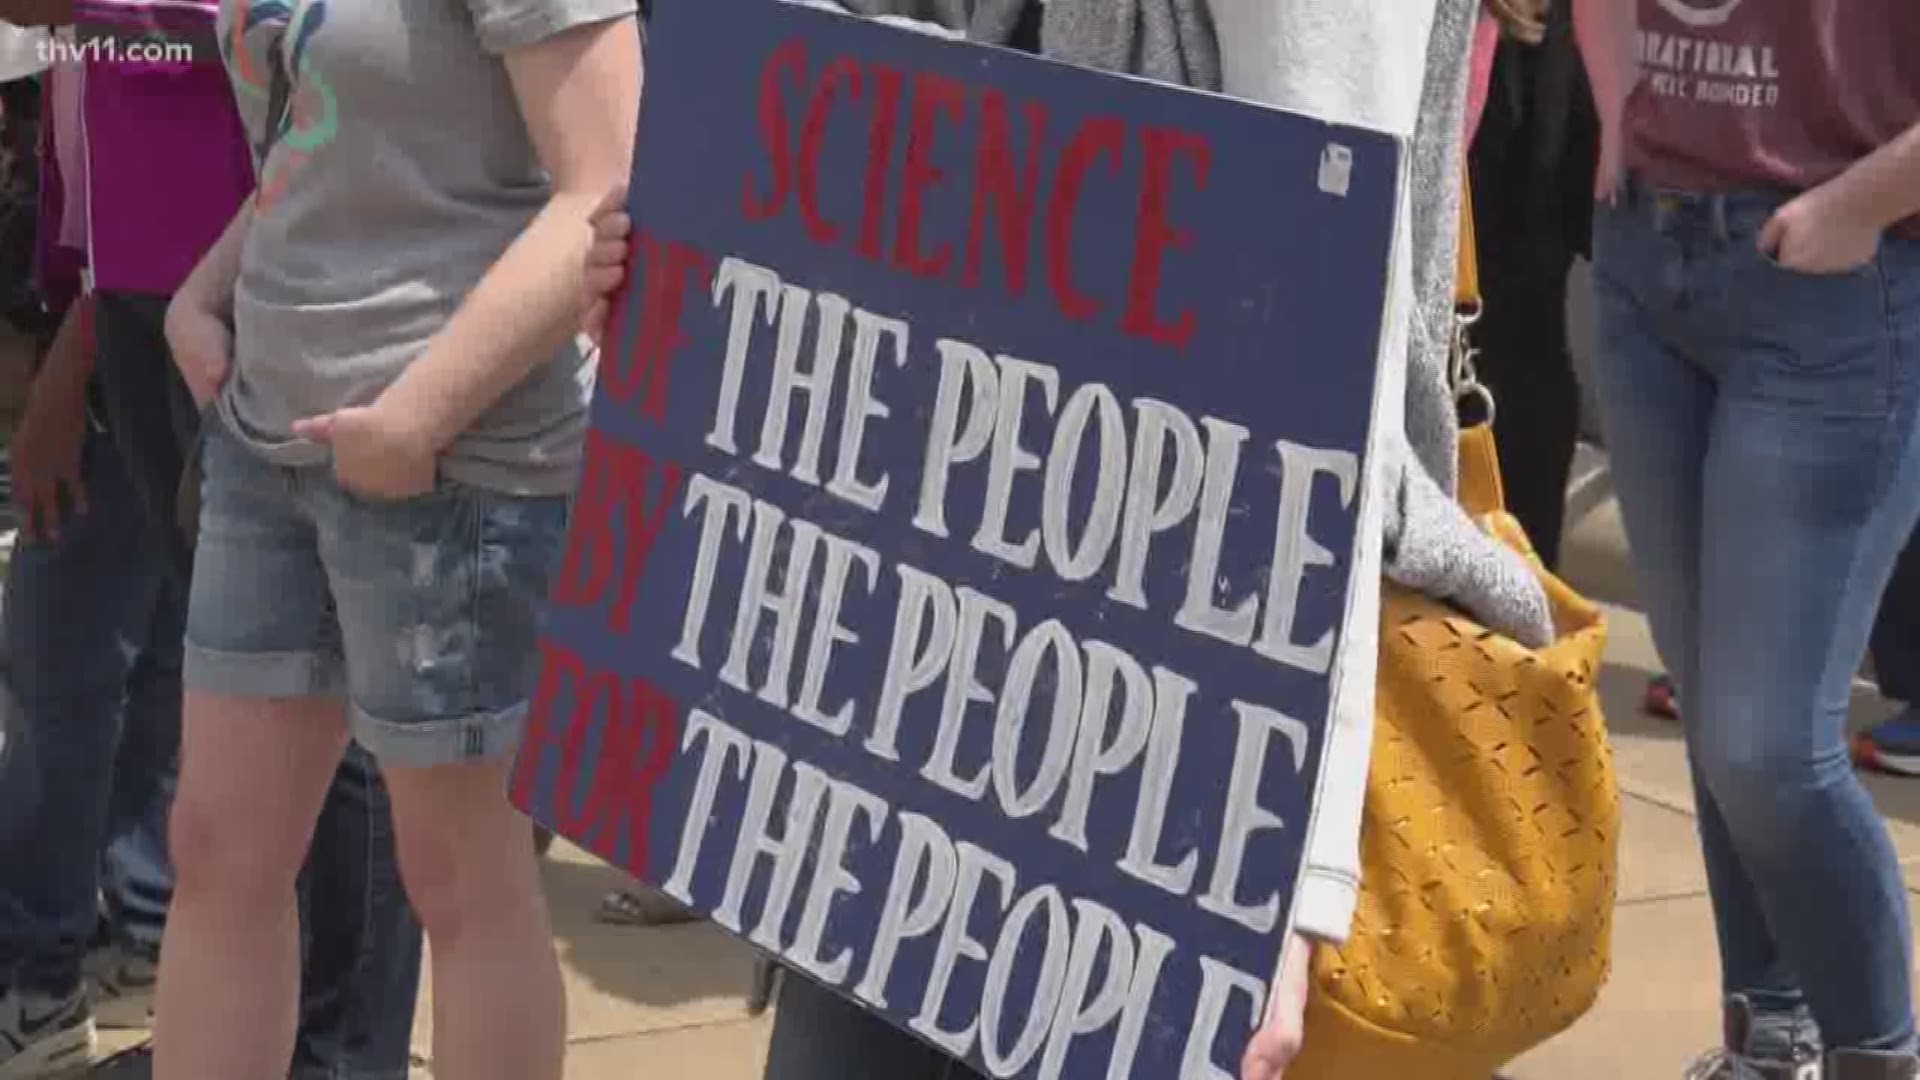 They want public officials to utilize science when making important political decisions.